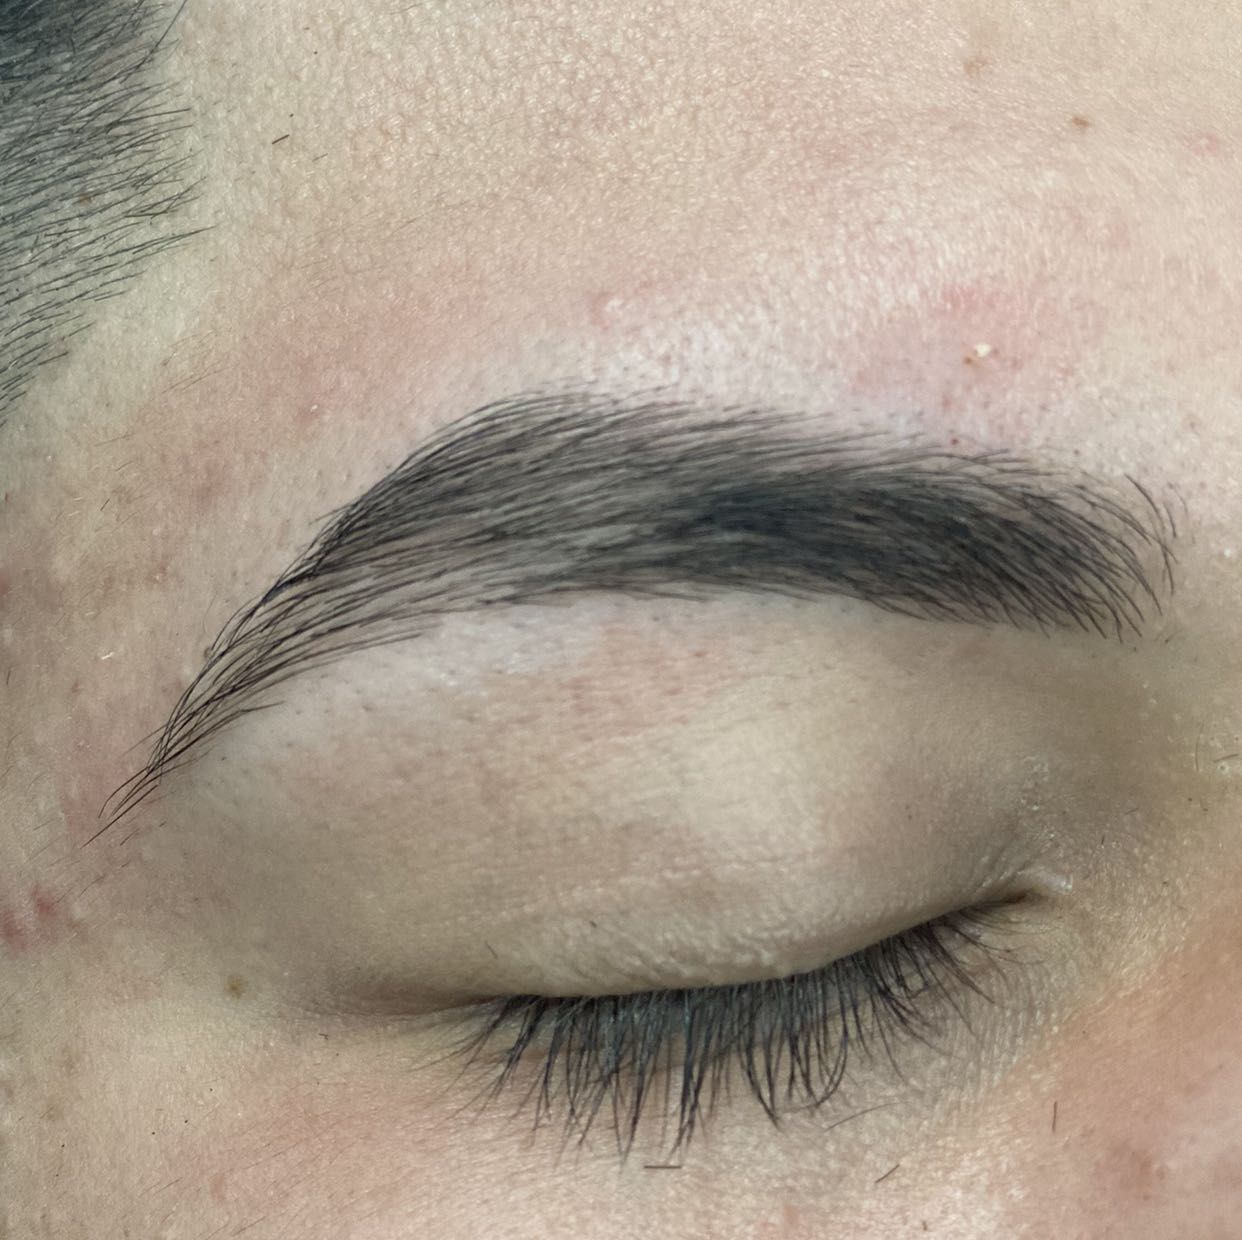 Eyebrow clean up  (After hours 8pm additional $20) portfolio